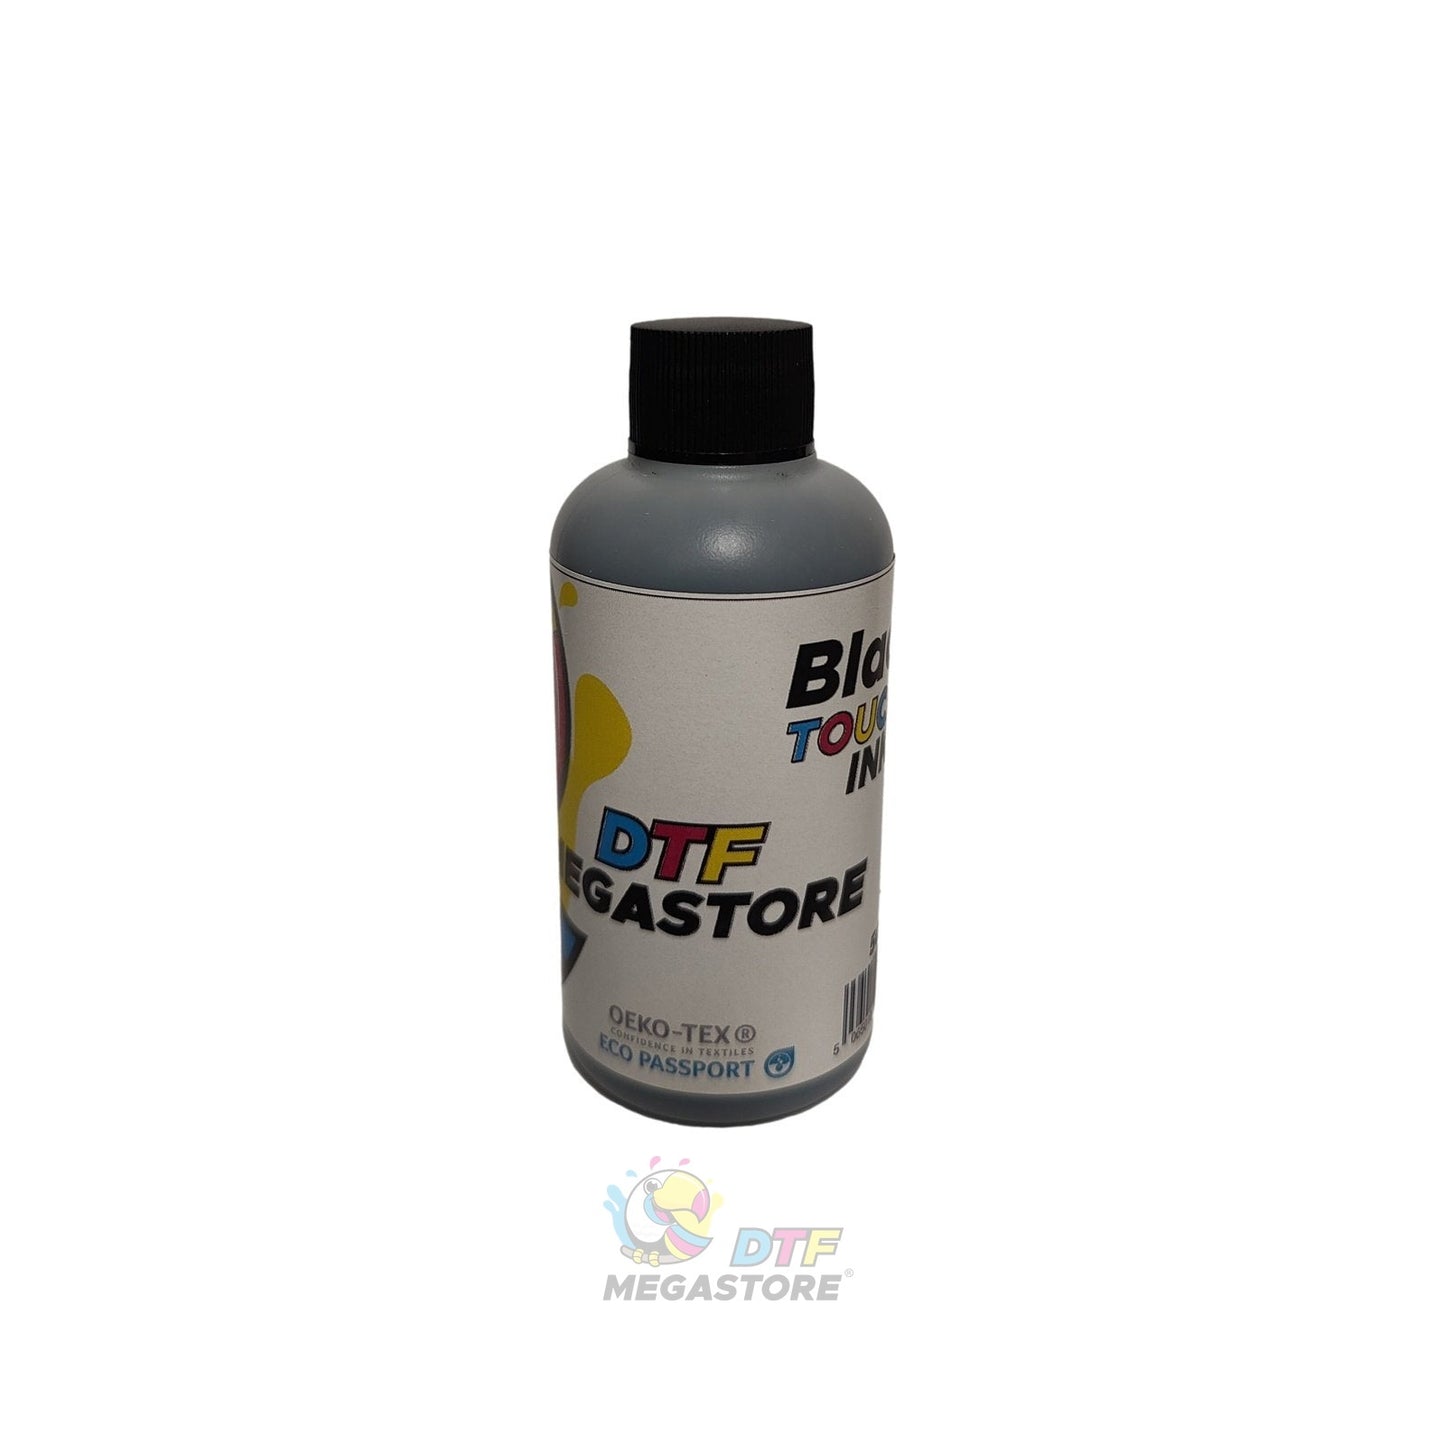 High Quality Black Premium DTF Direct to transfer film printing glycol glycerin pigment based ink 100ml UK fast Delivery